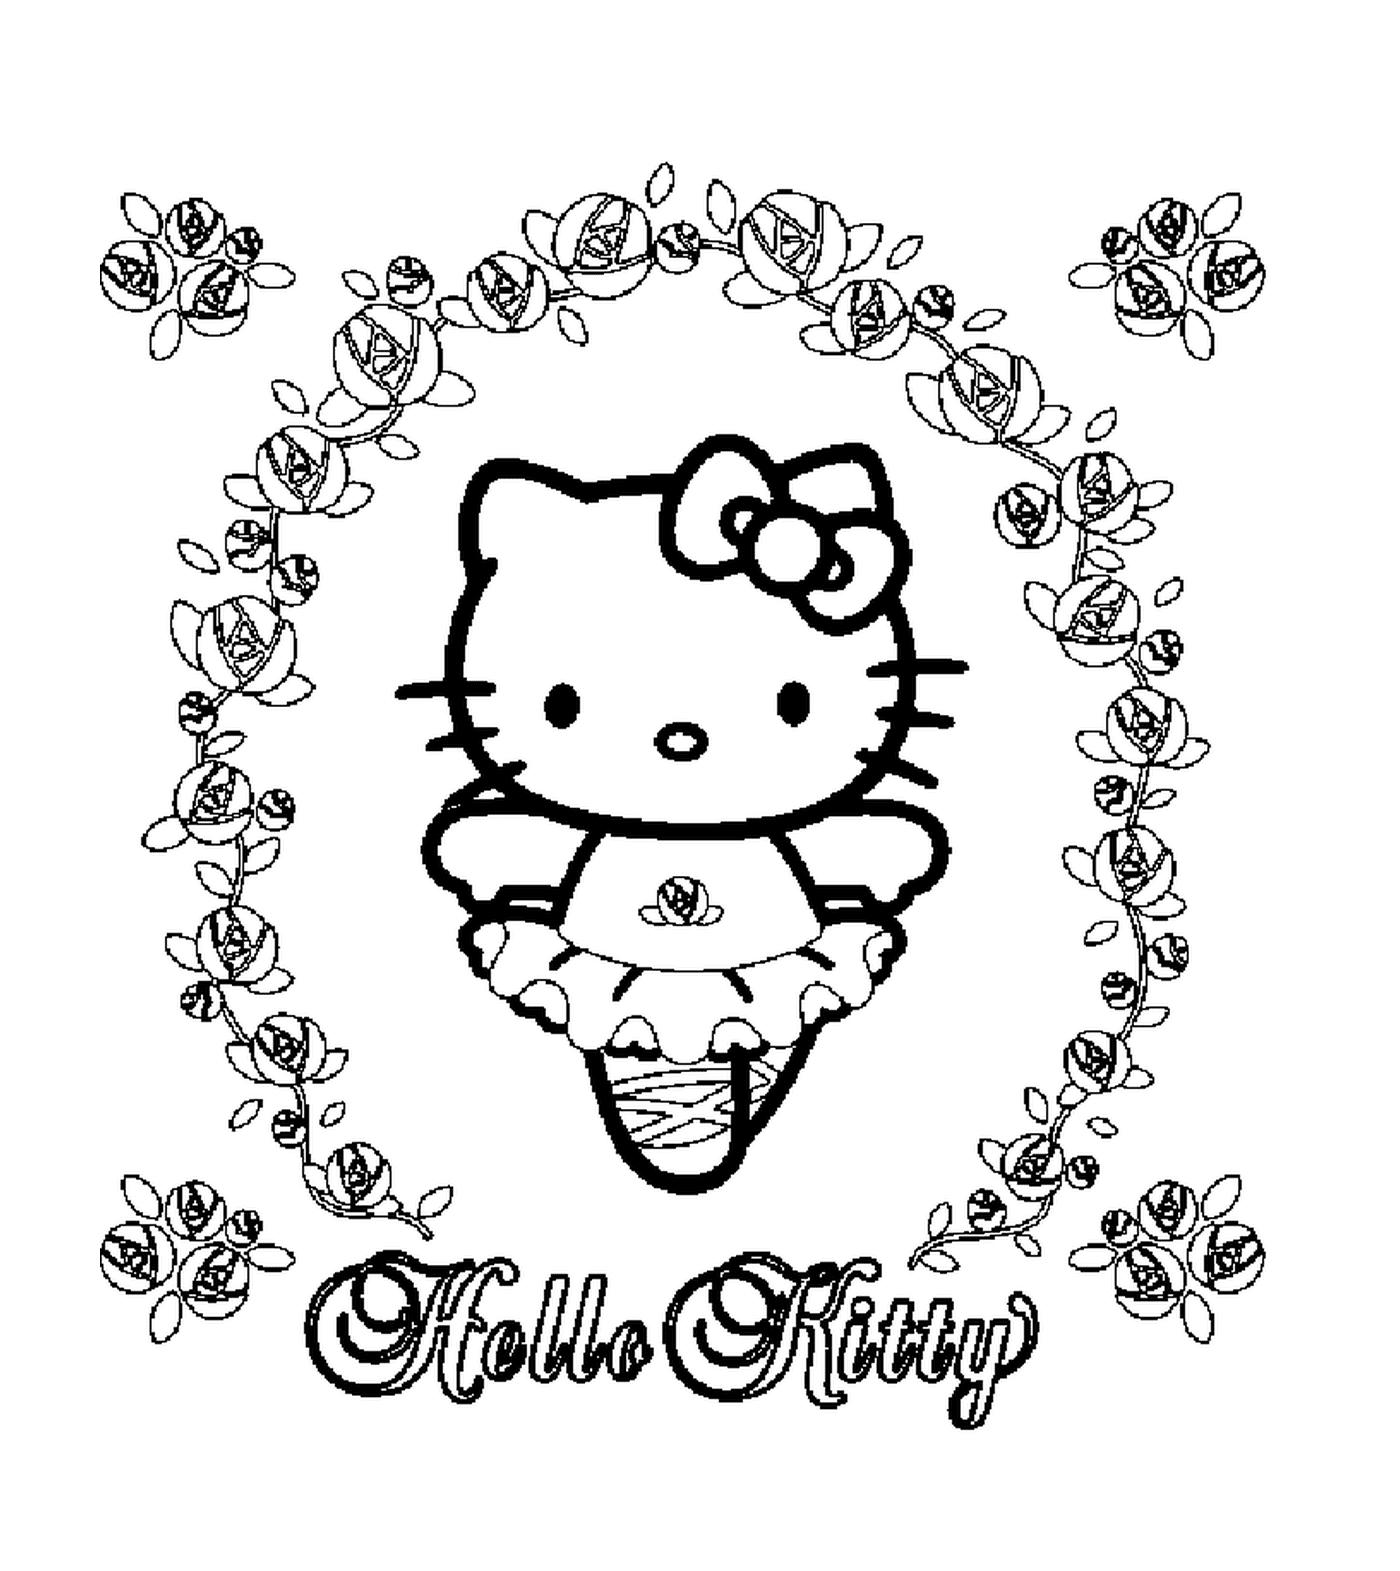  Hello Kitty surrounded by roses 